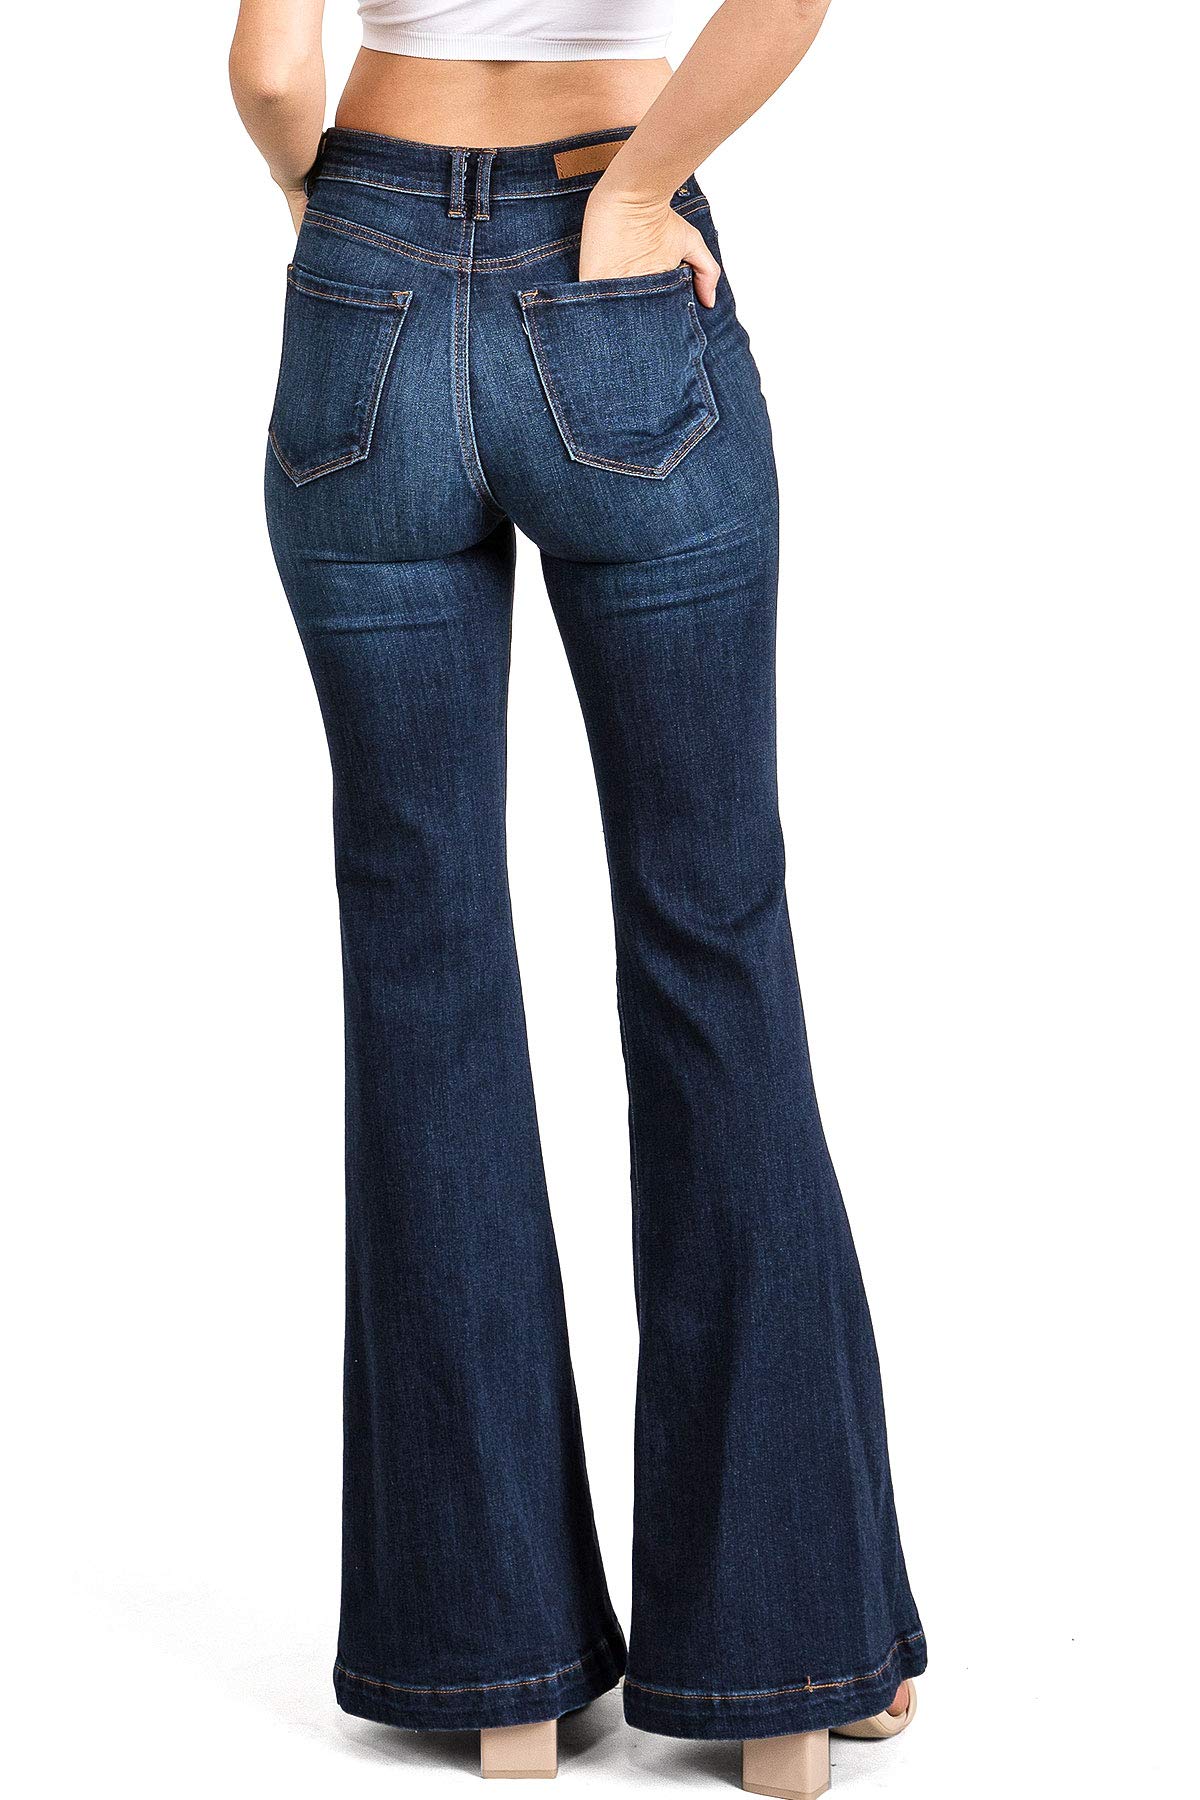 Downtown Bell Bottom Jeans